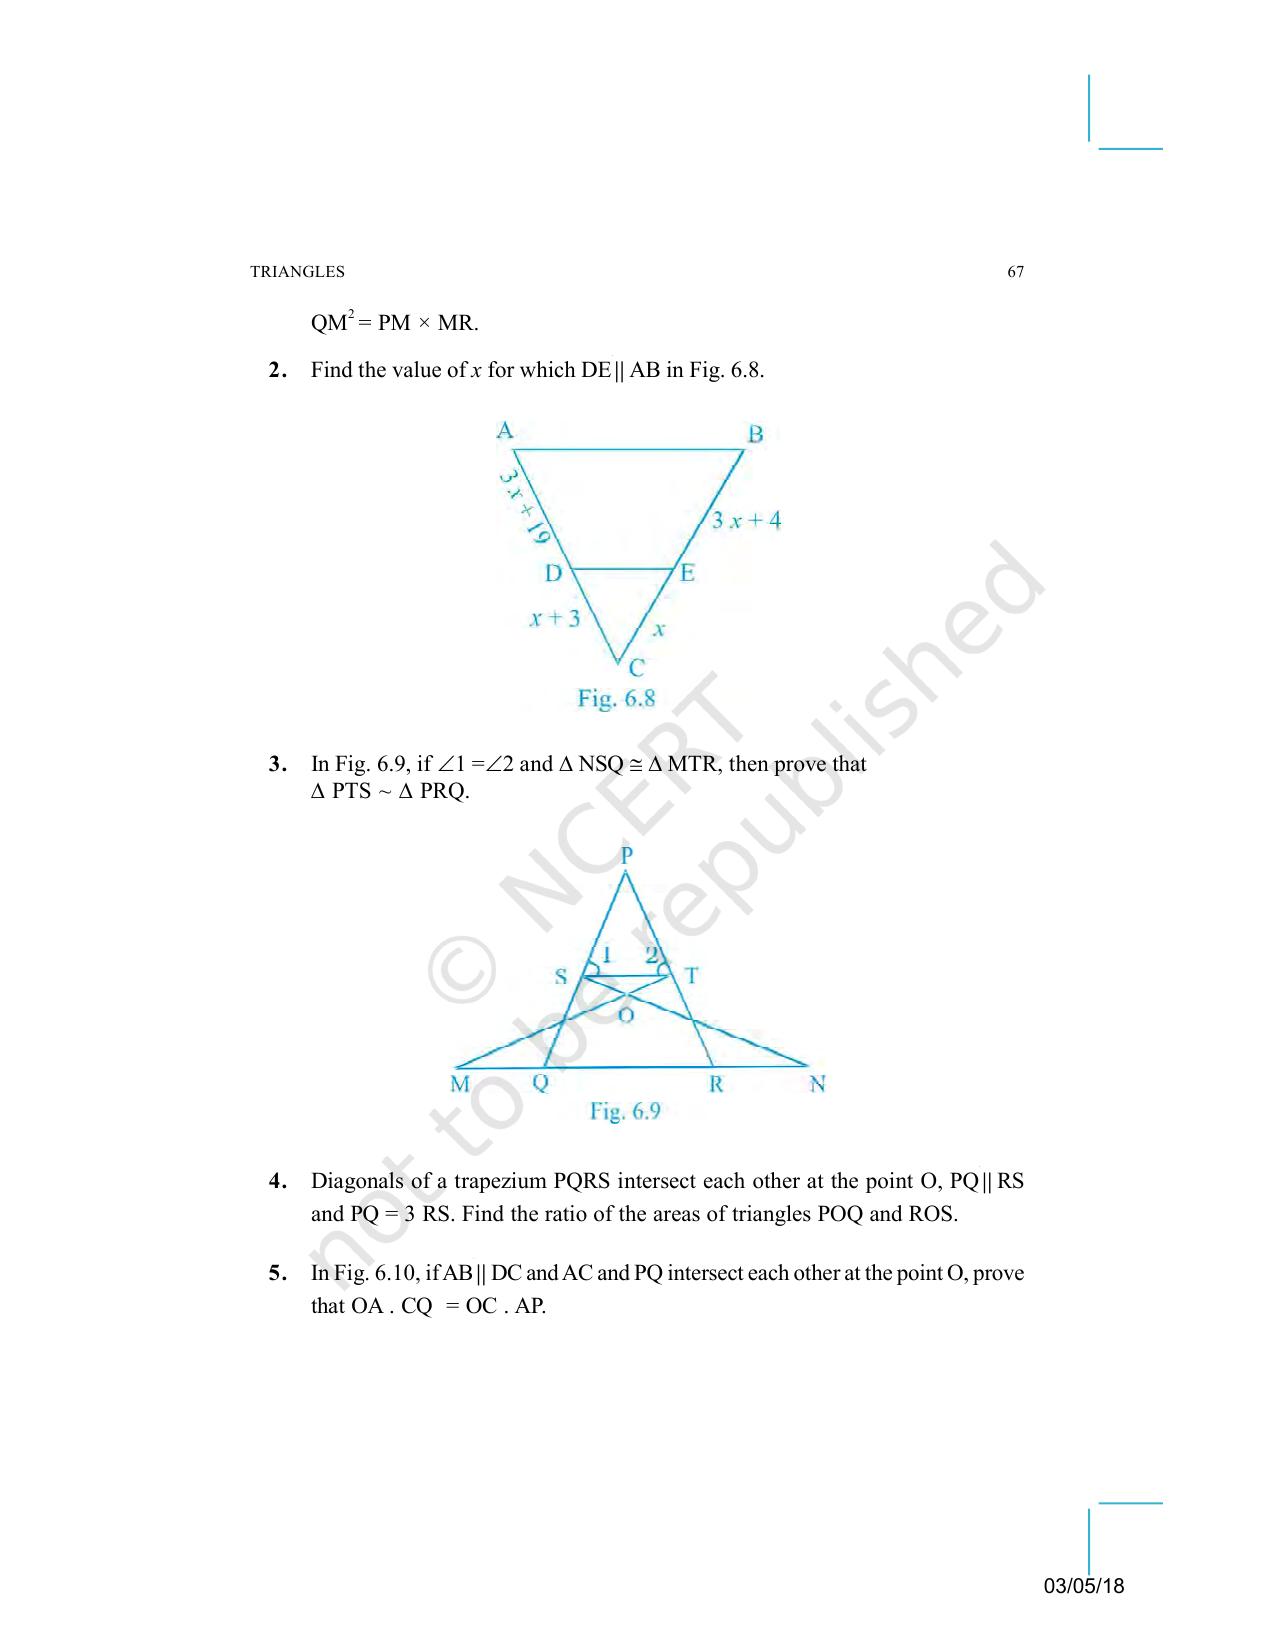 NCERT Exemplar Book for Class 10 Maths: Chapter 6 Triangles - Page 9